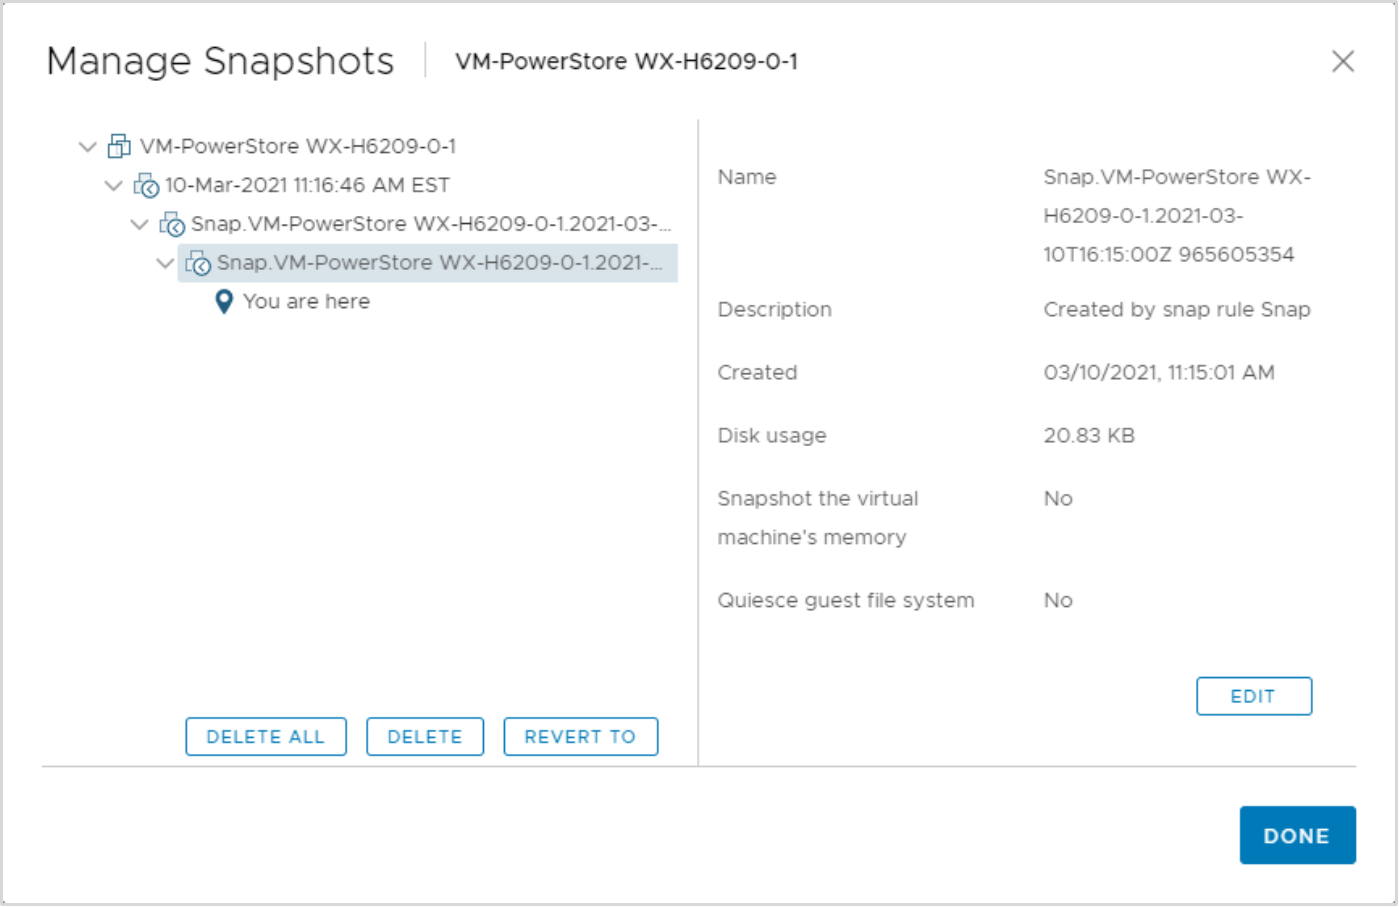 A screenshot of vCenter showing a VM's manual and scheduled snapshots that were created by PowerStore.